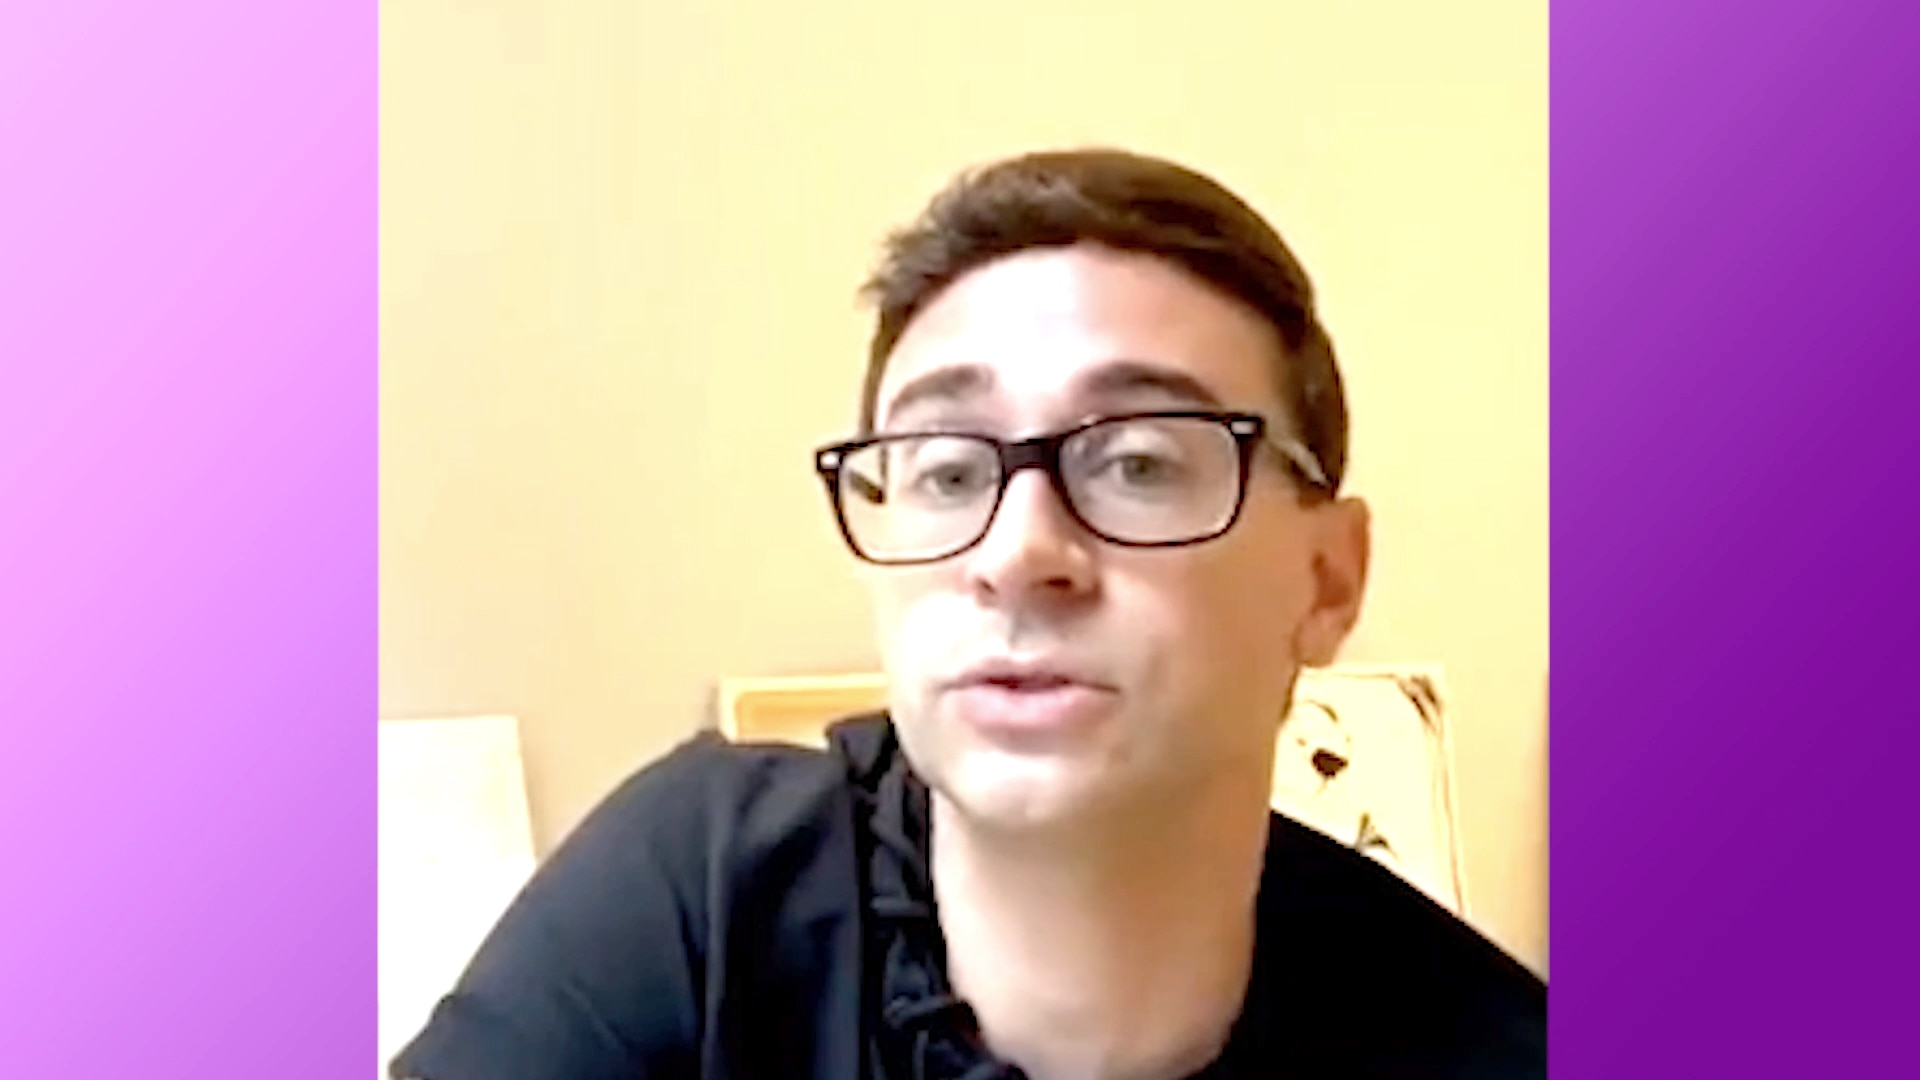 Christian Siriano: "It's Not Enough to Just Make Pretty Dresses"